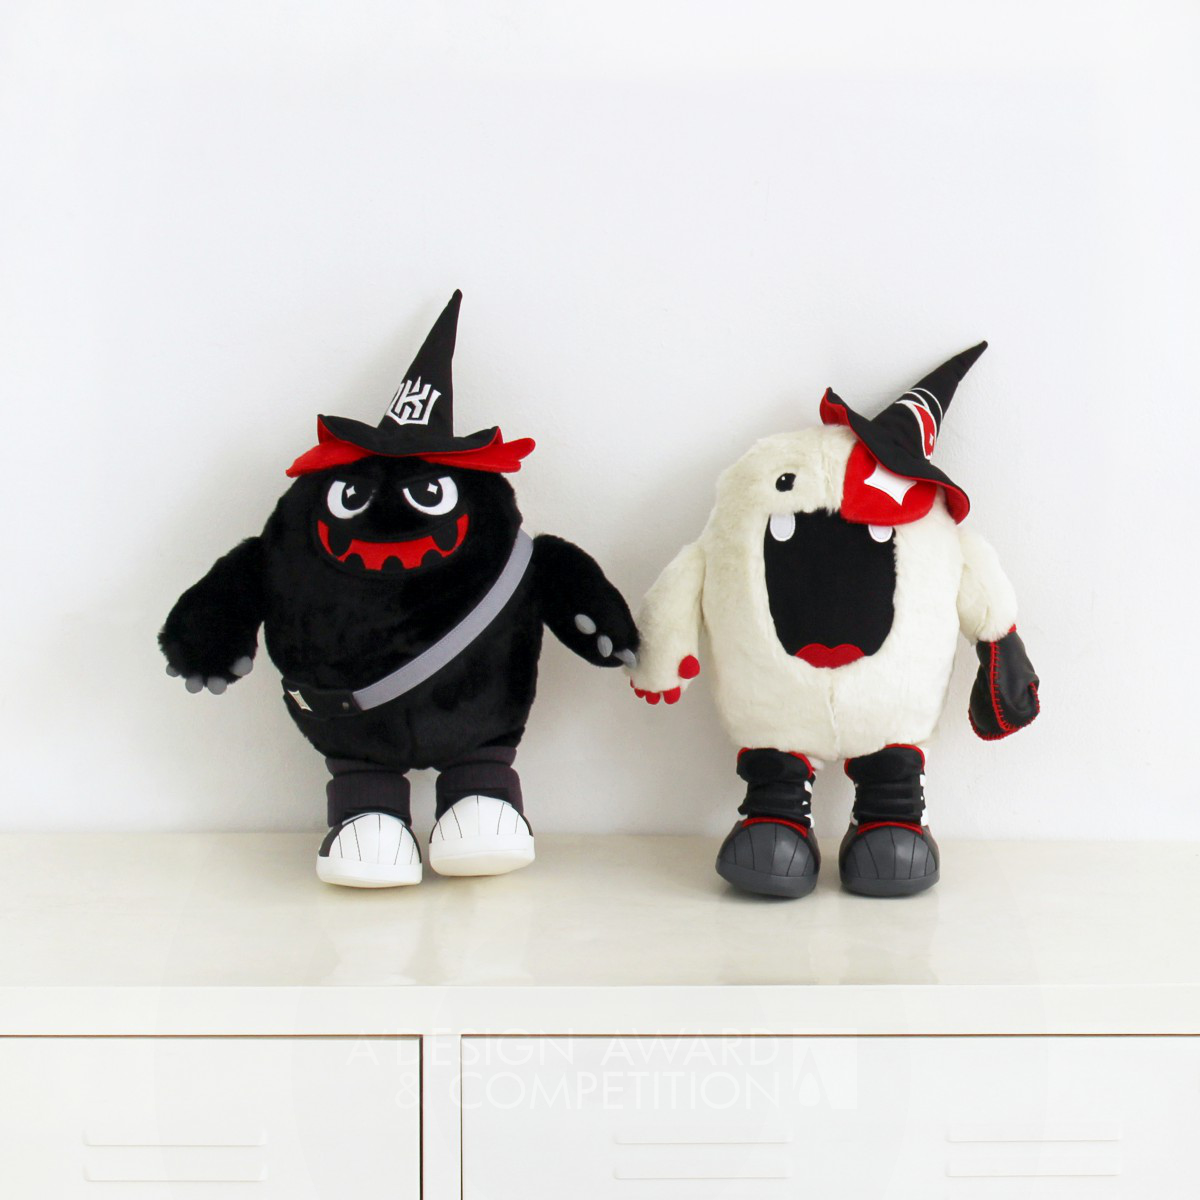 vic & ddory (Mascot) Sports Brand Mascot Toy Collection by kt Corporation